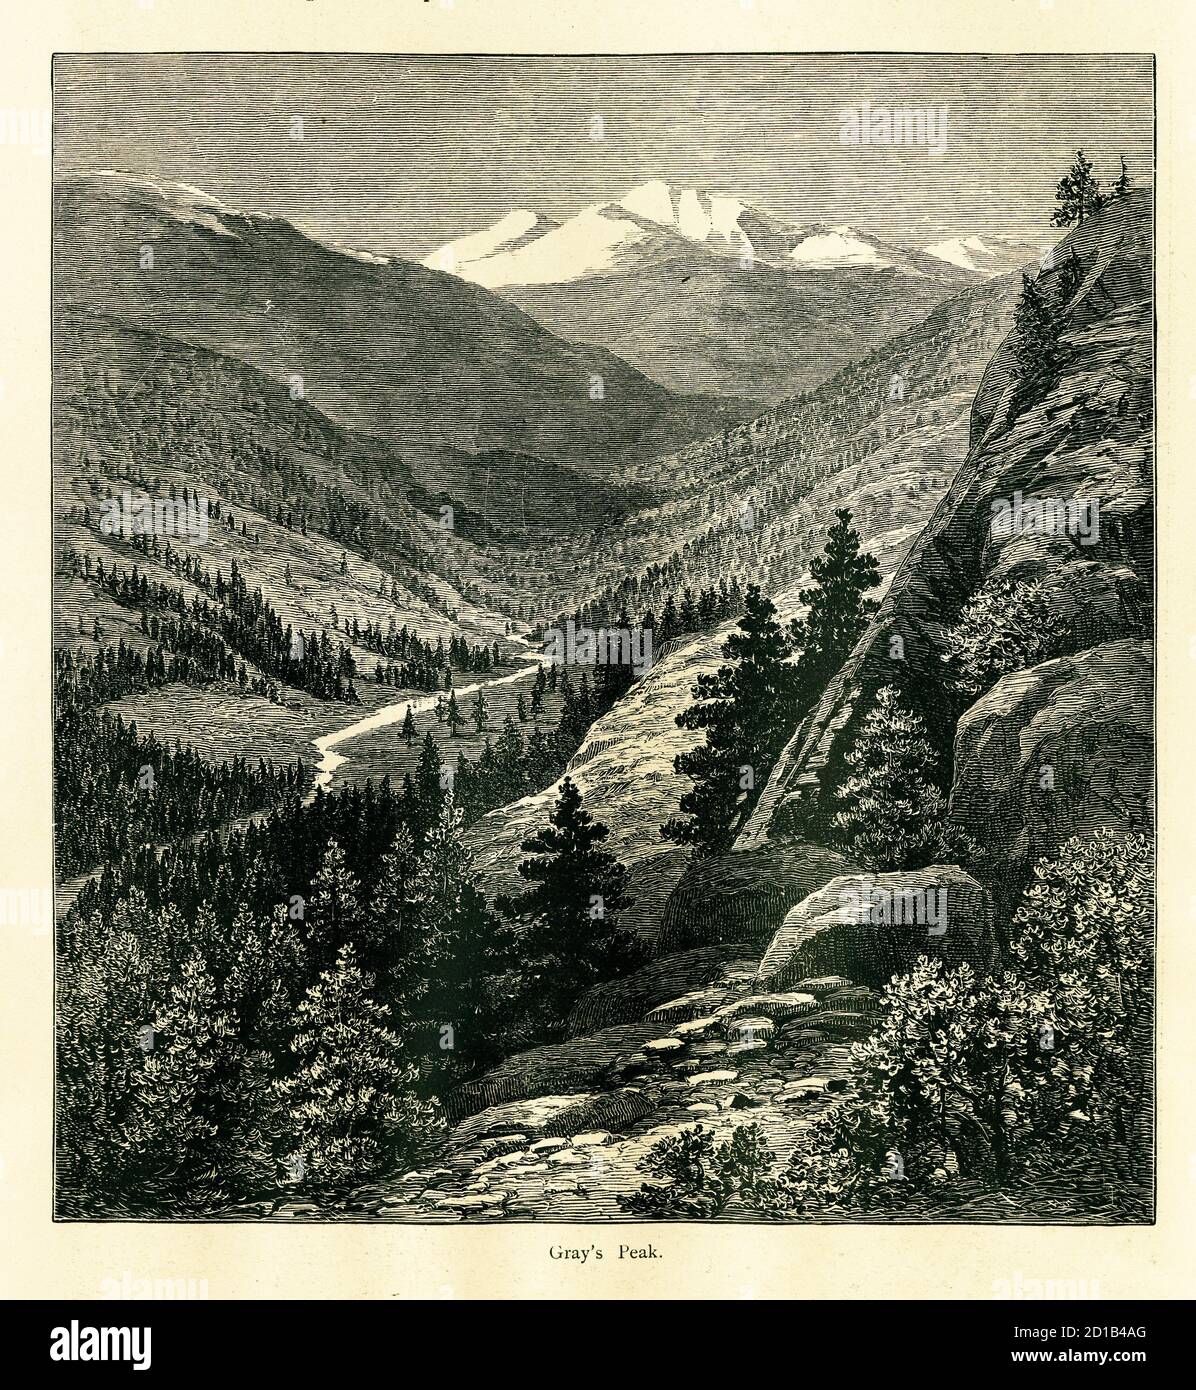 19th-century engraving of Grays Peak, the highest mountain in the Front Range of the Southern Rocky Mountains, Colorado, USA. Illustration published i Stock Photo